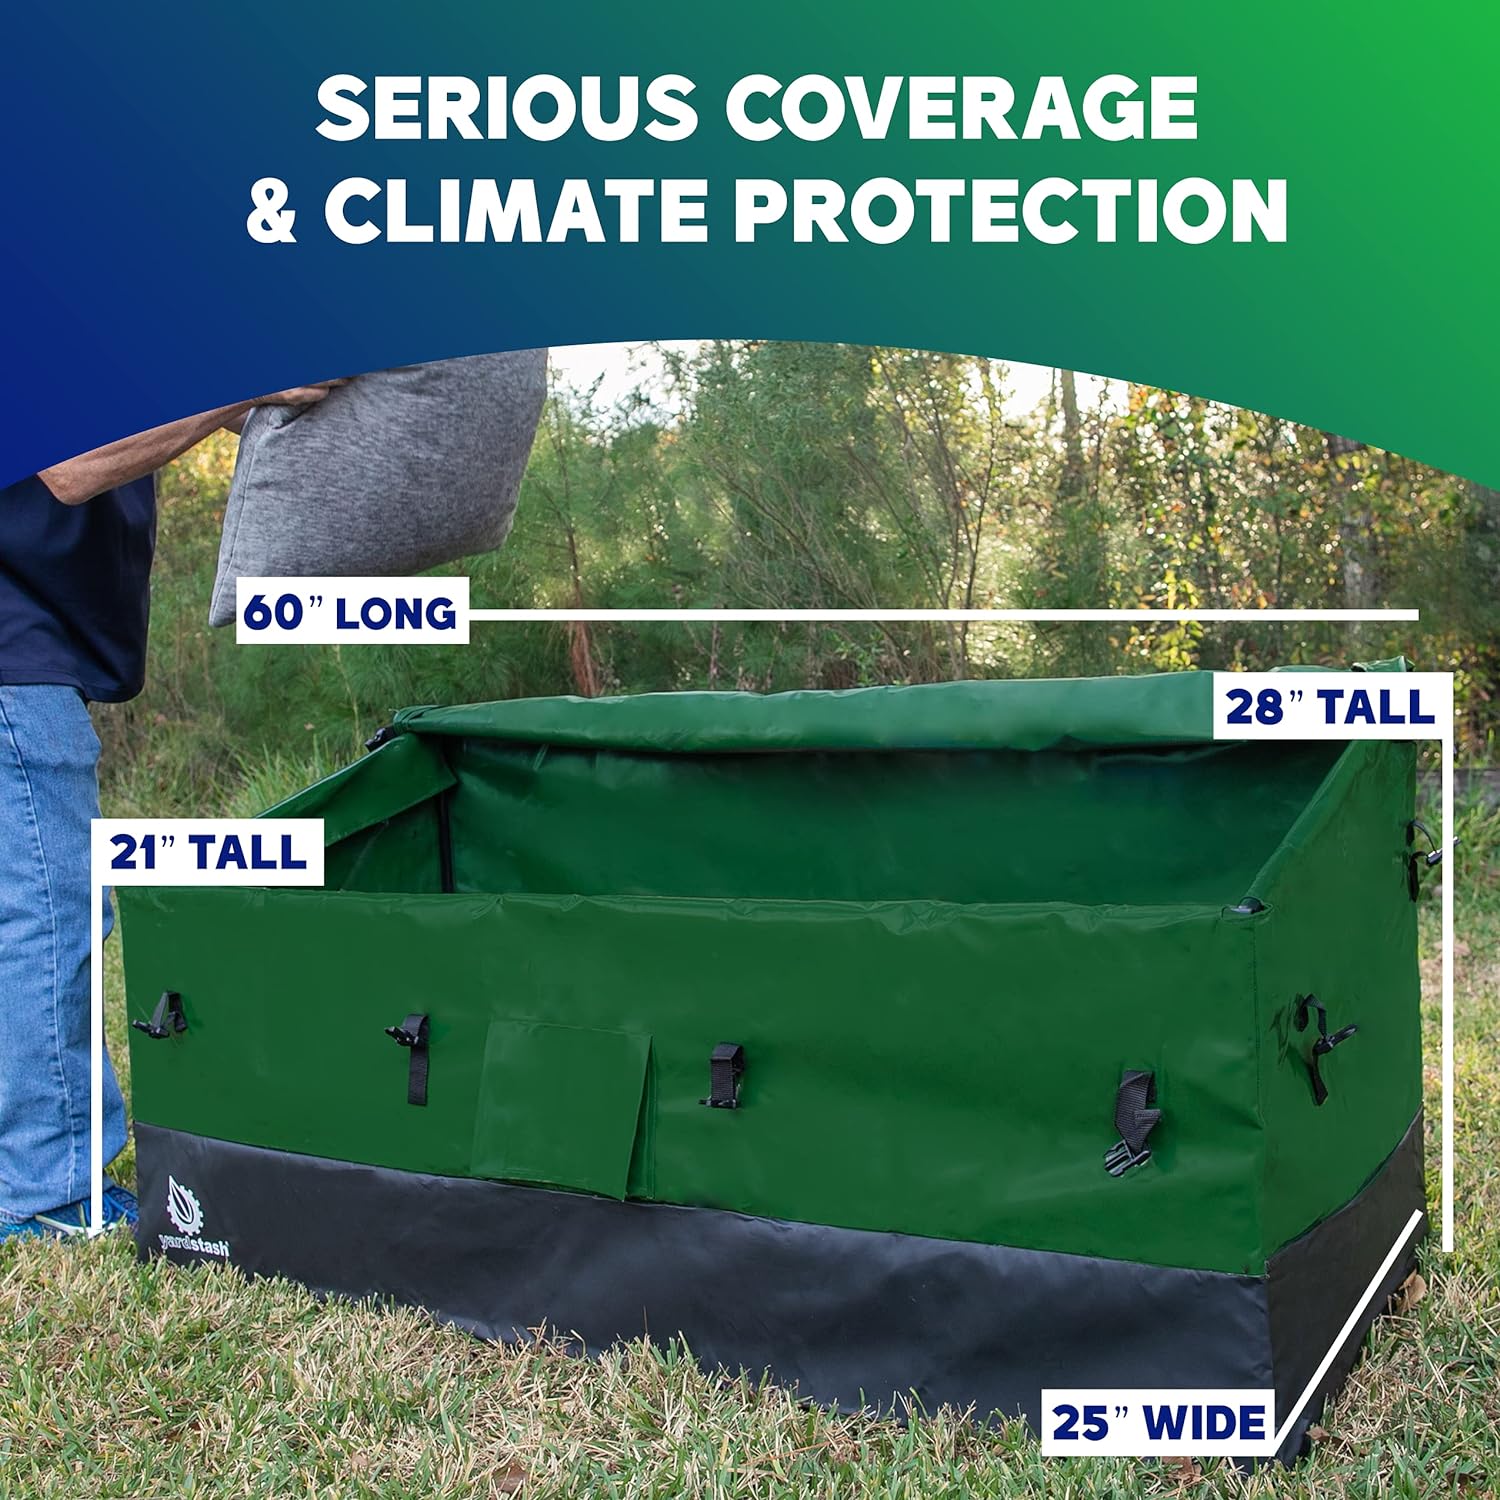 Waterproof Wind - Heavy Duty Sun & Snow Portable Patio Protects from Rain or Camping – XL Green Yard All Weather Tarpaulin Deck Box YardStash Outdoor Storage Box Perfect for the Boat